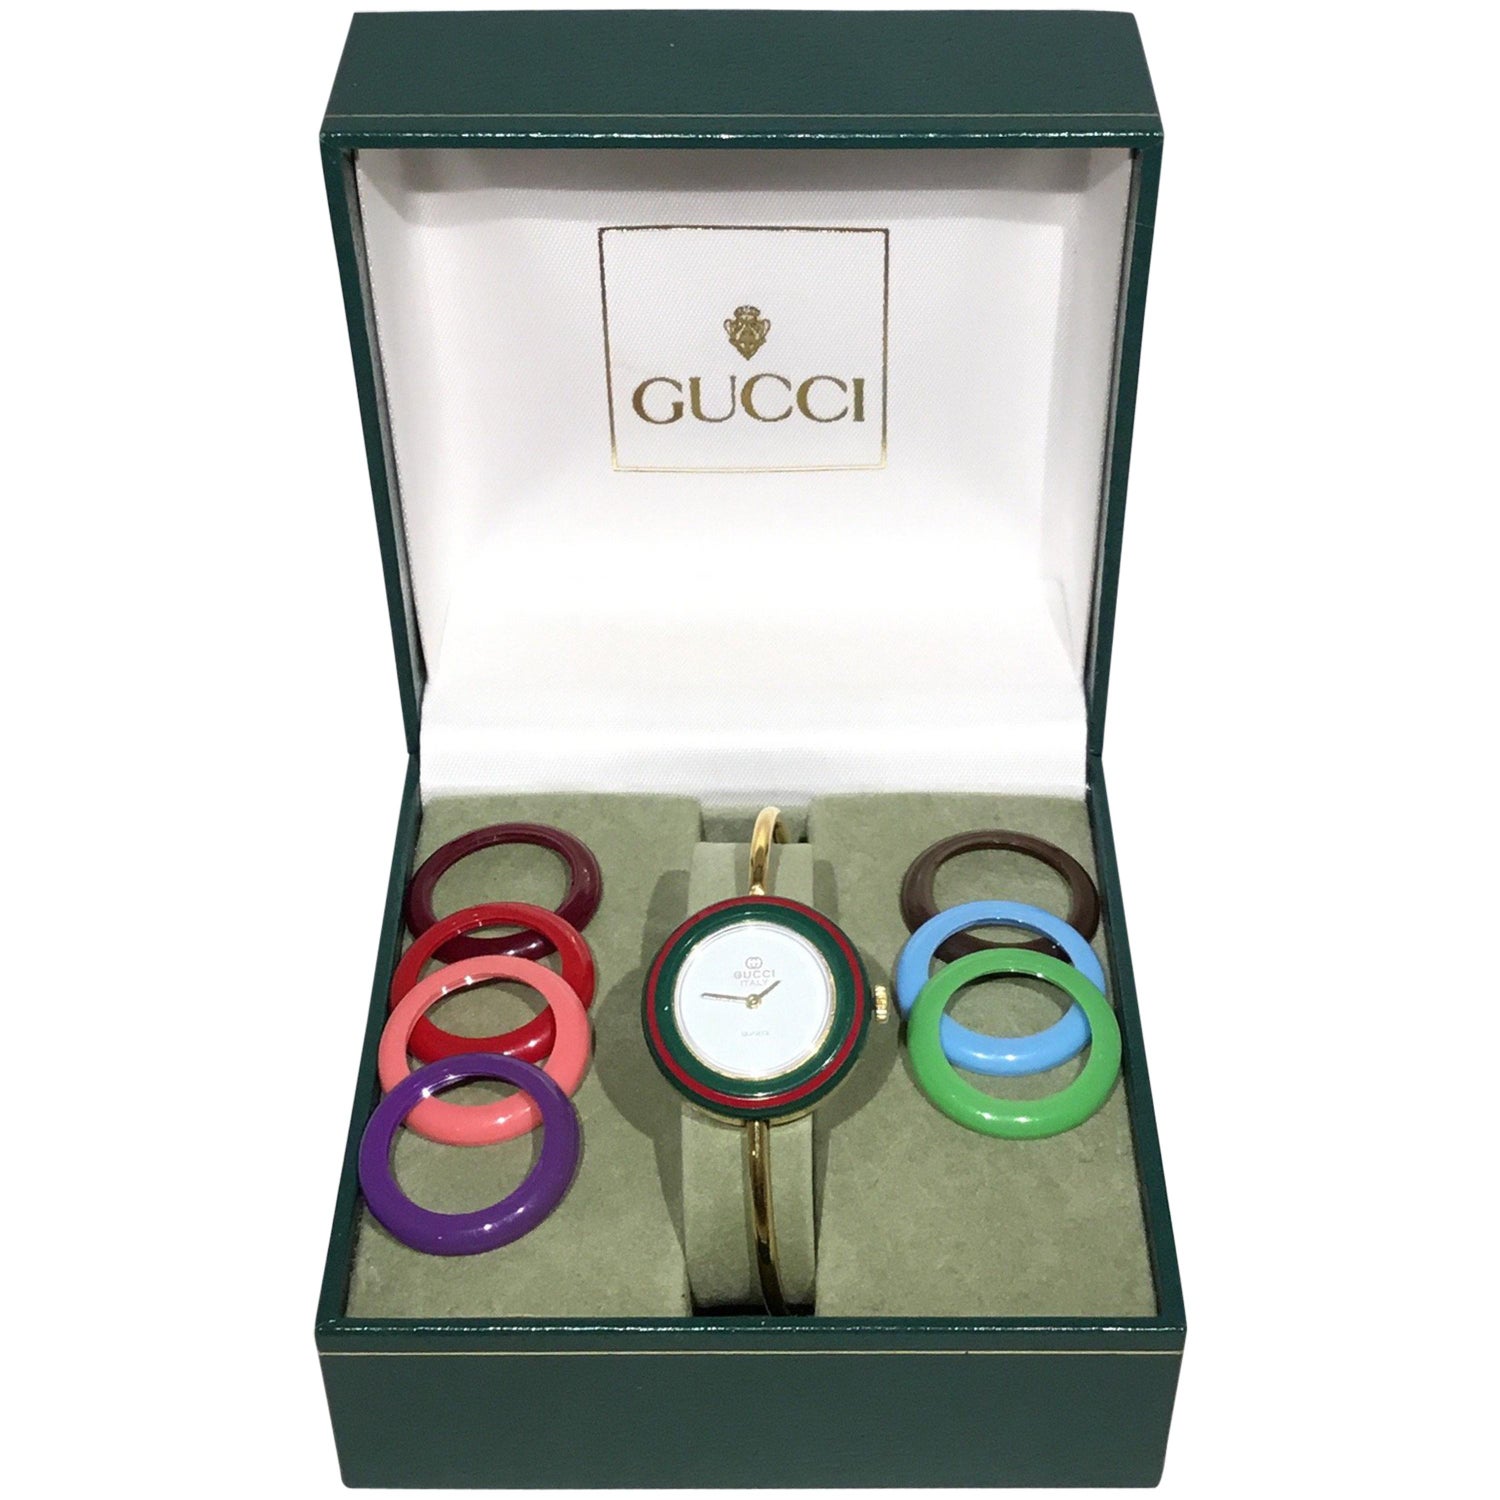 Gucci Bezel Watch - 2 For Sale on 1stDibs | gucci interchangeable bezel  watch, gucci bezel watch original price, gucci bezel watch price